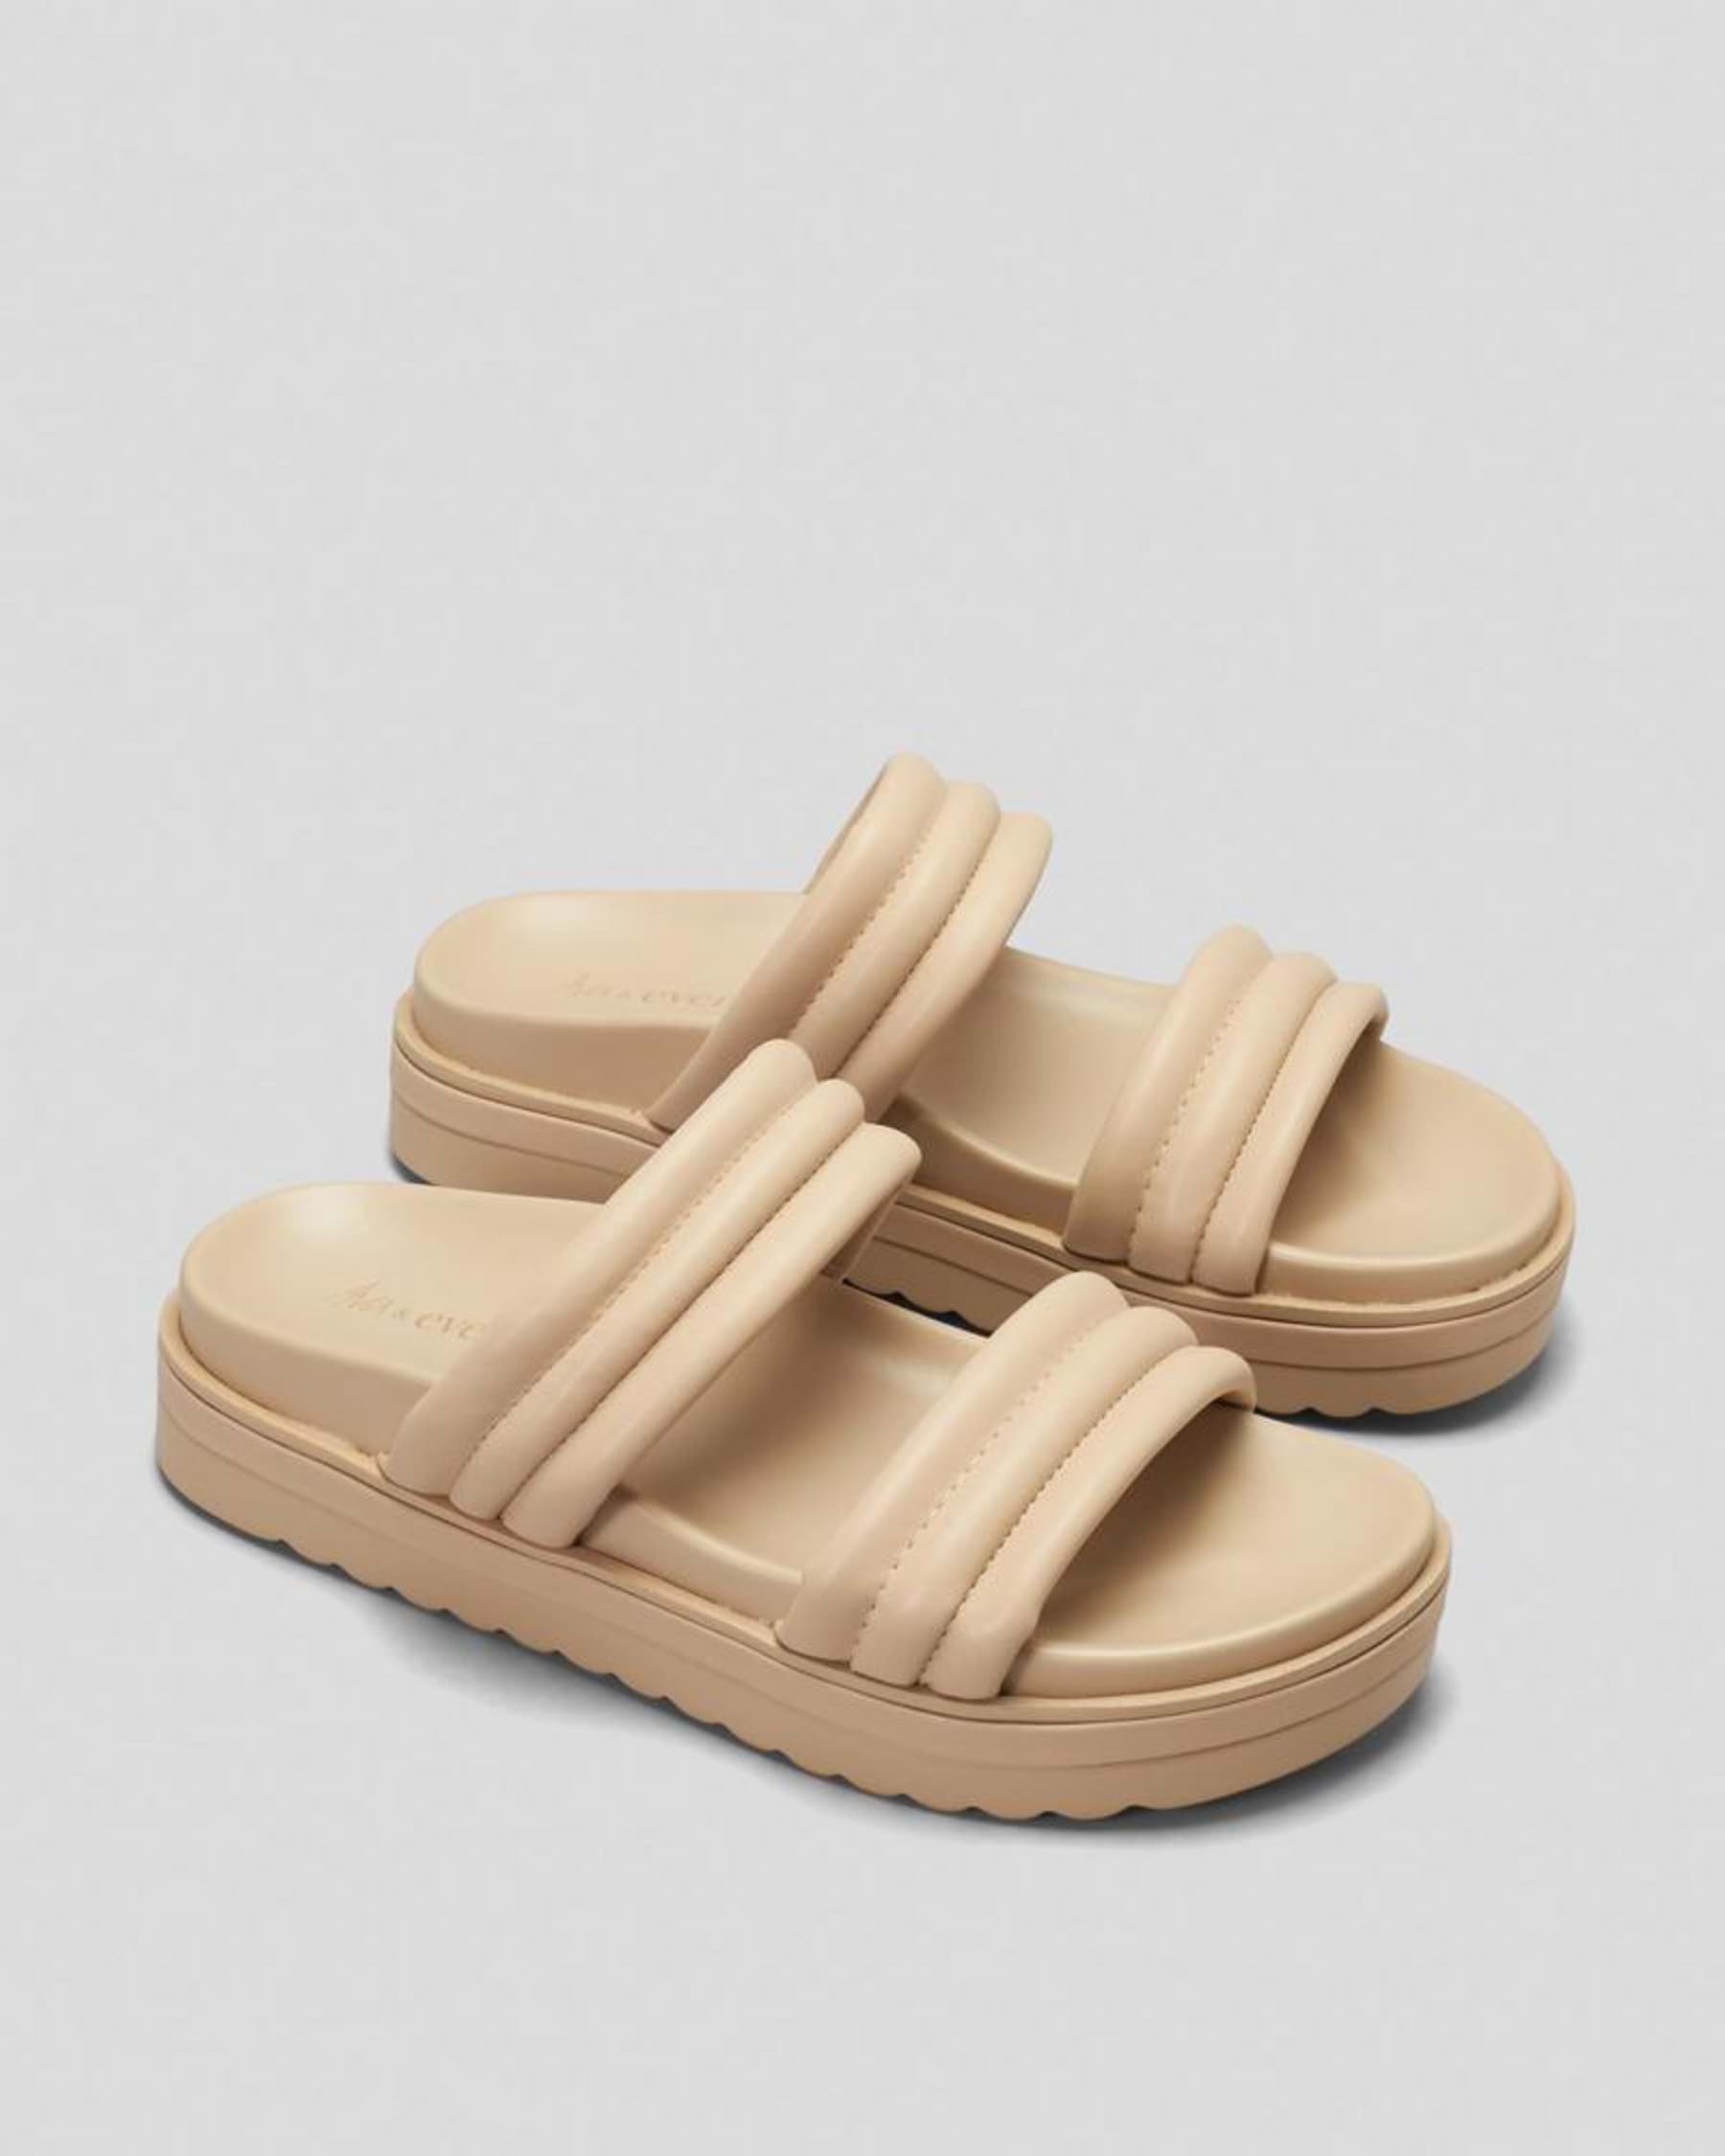 Ava And Ever Rhodes Slide Sandals In Sand - Fast Shipping & Easy ...